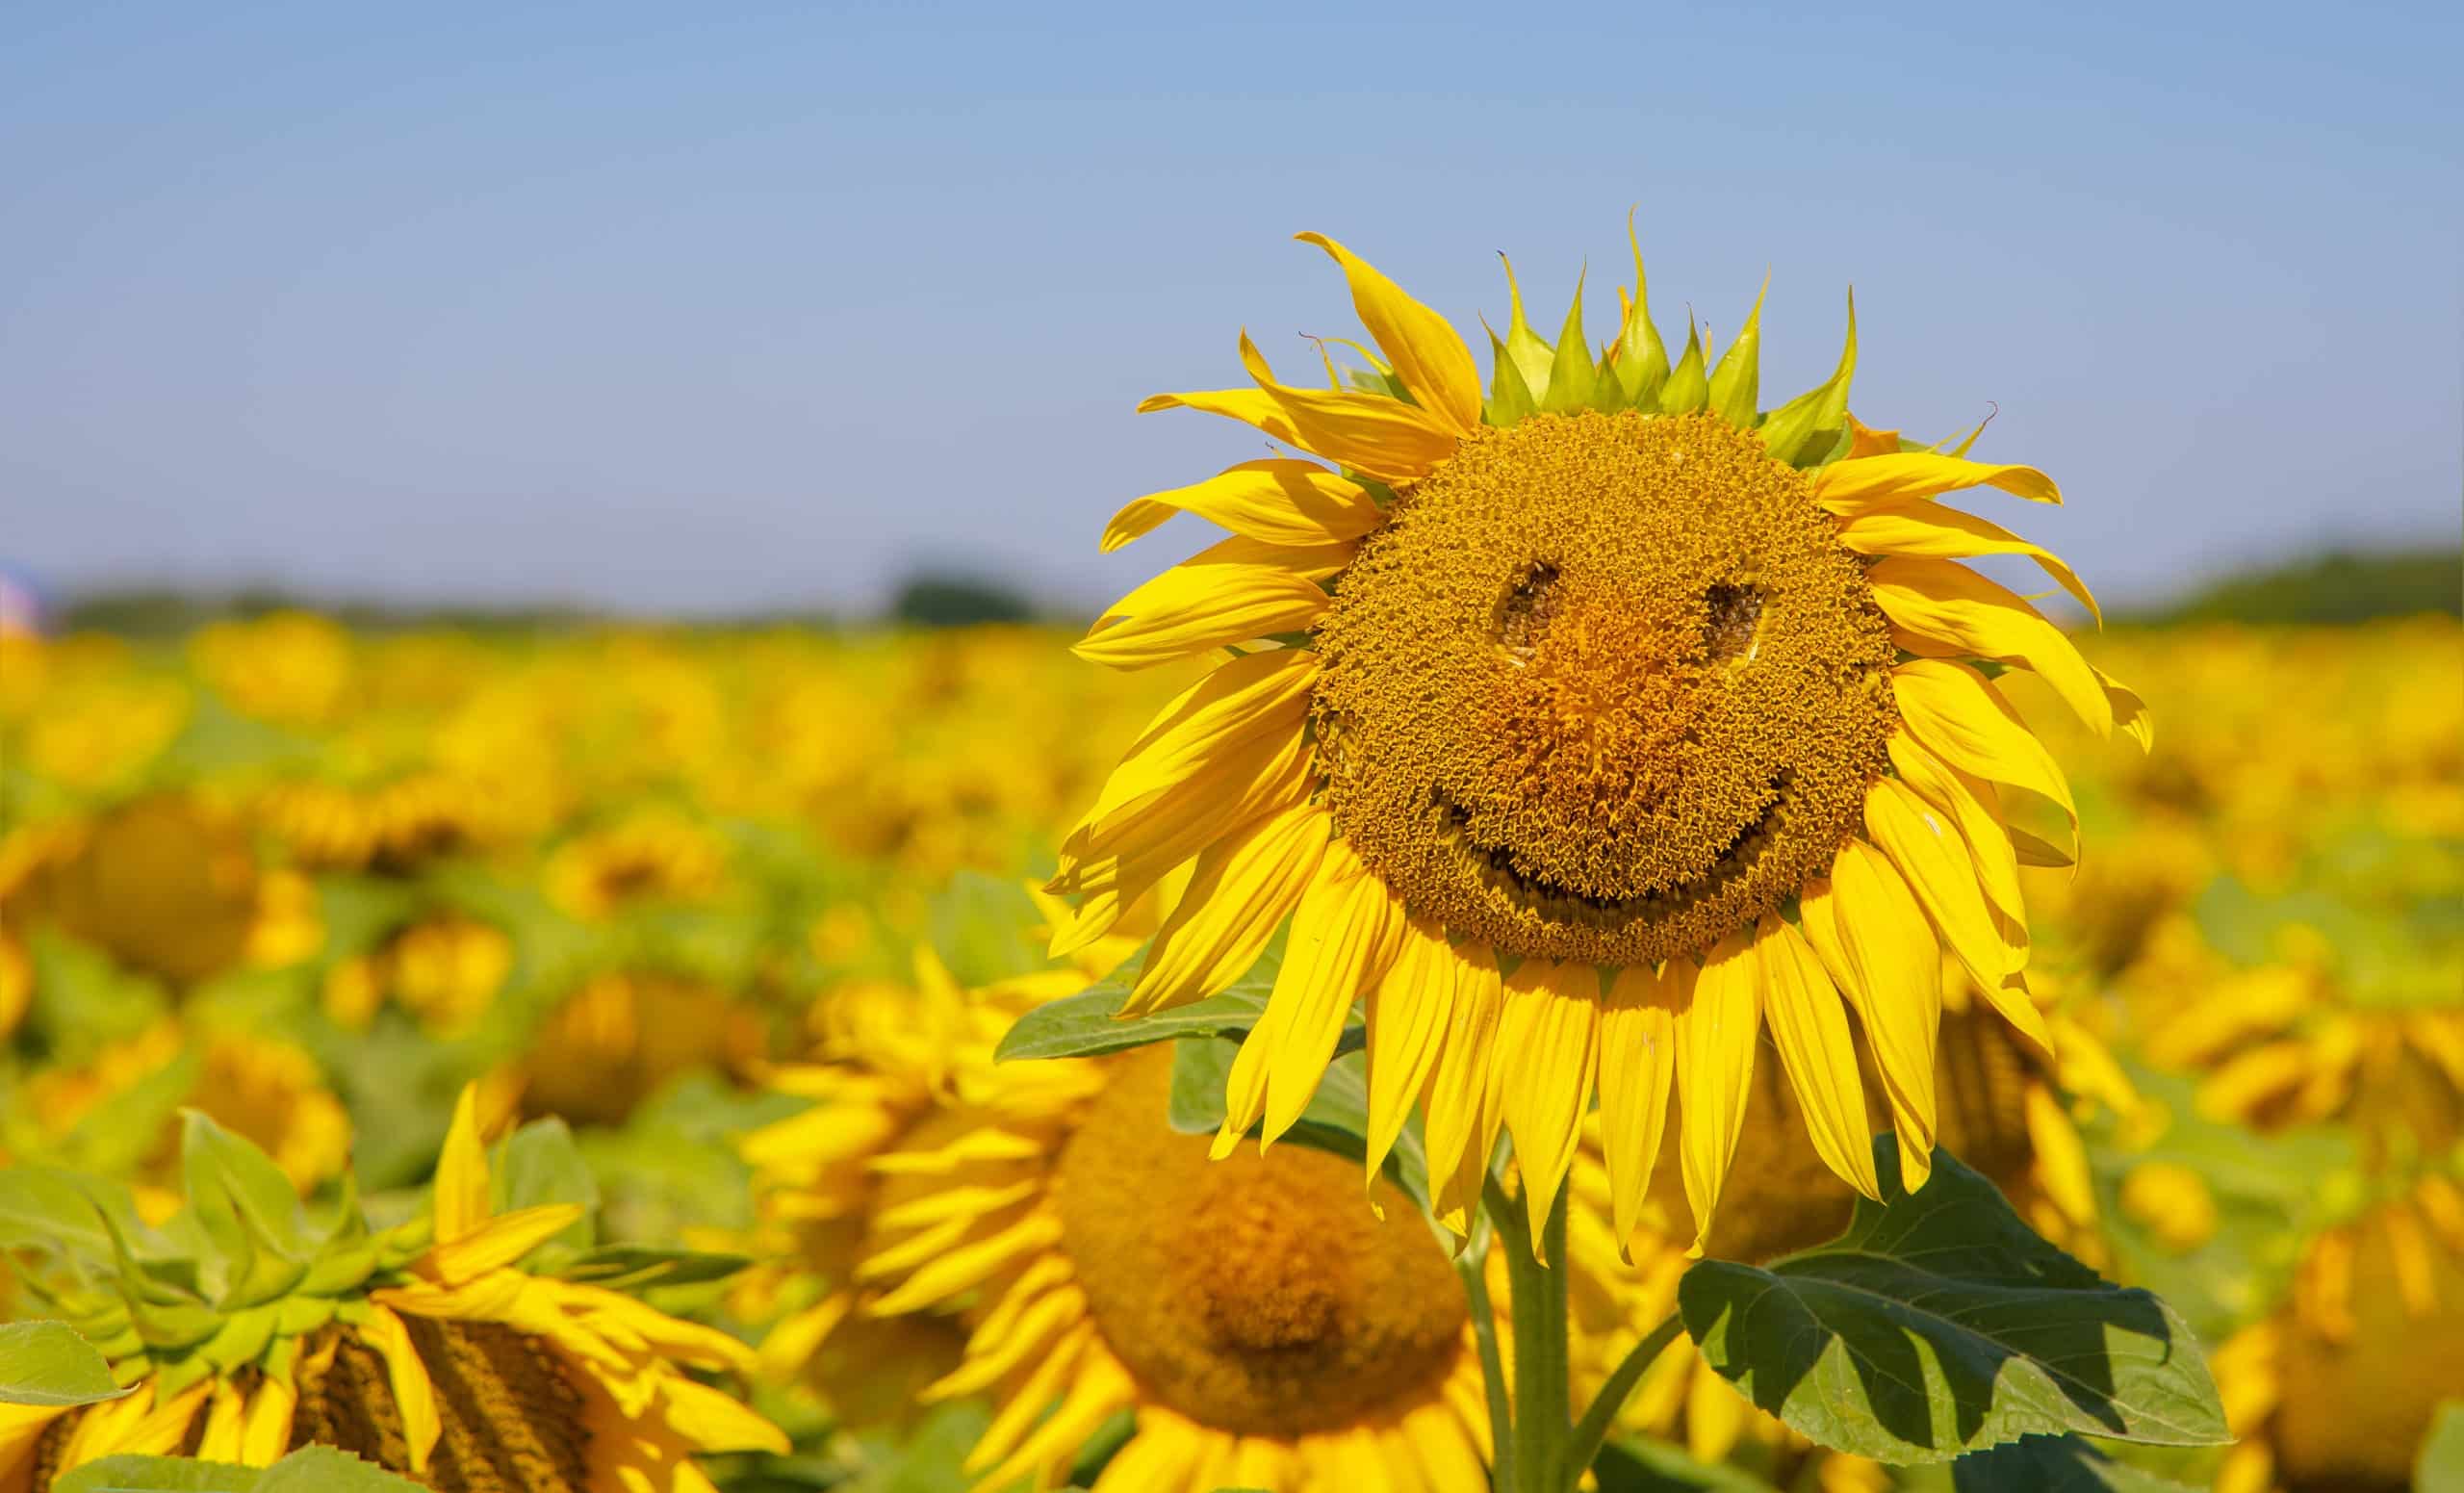 Sunflower with funny face in a field of sunflower.